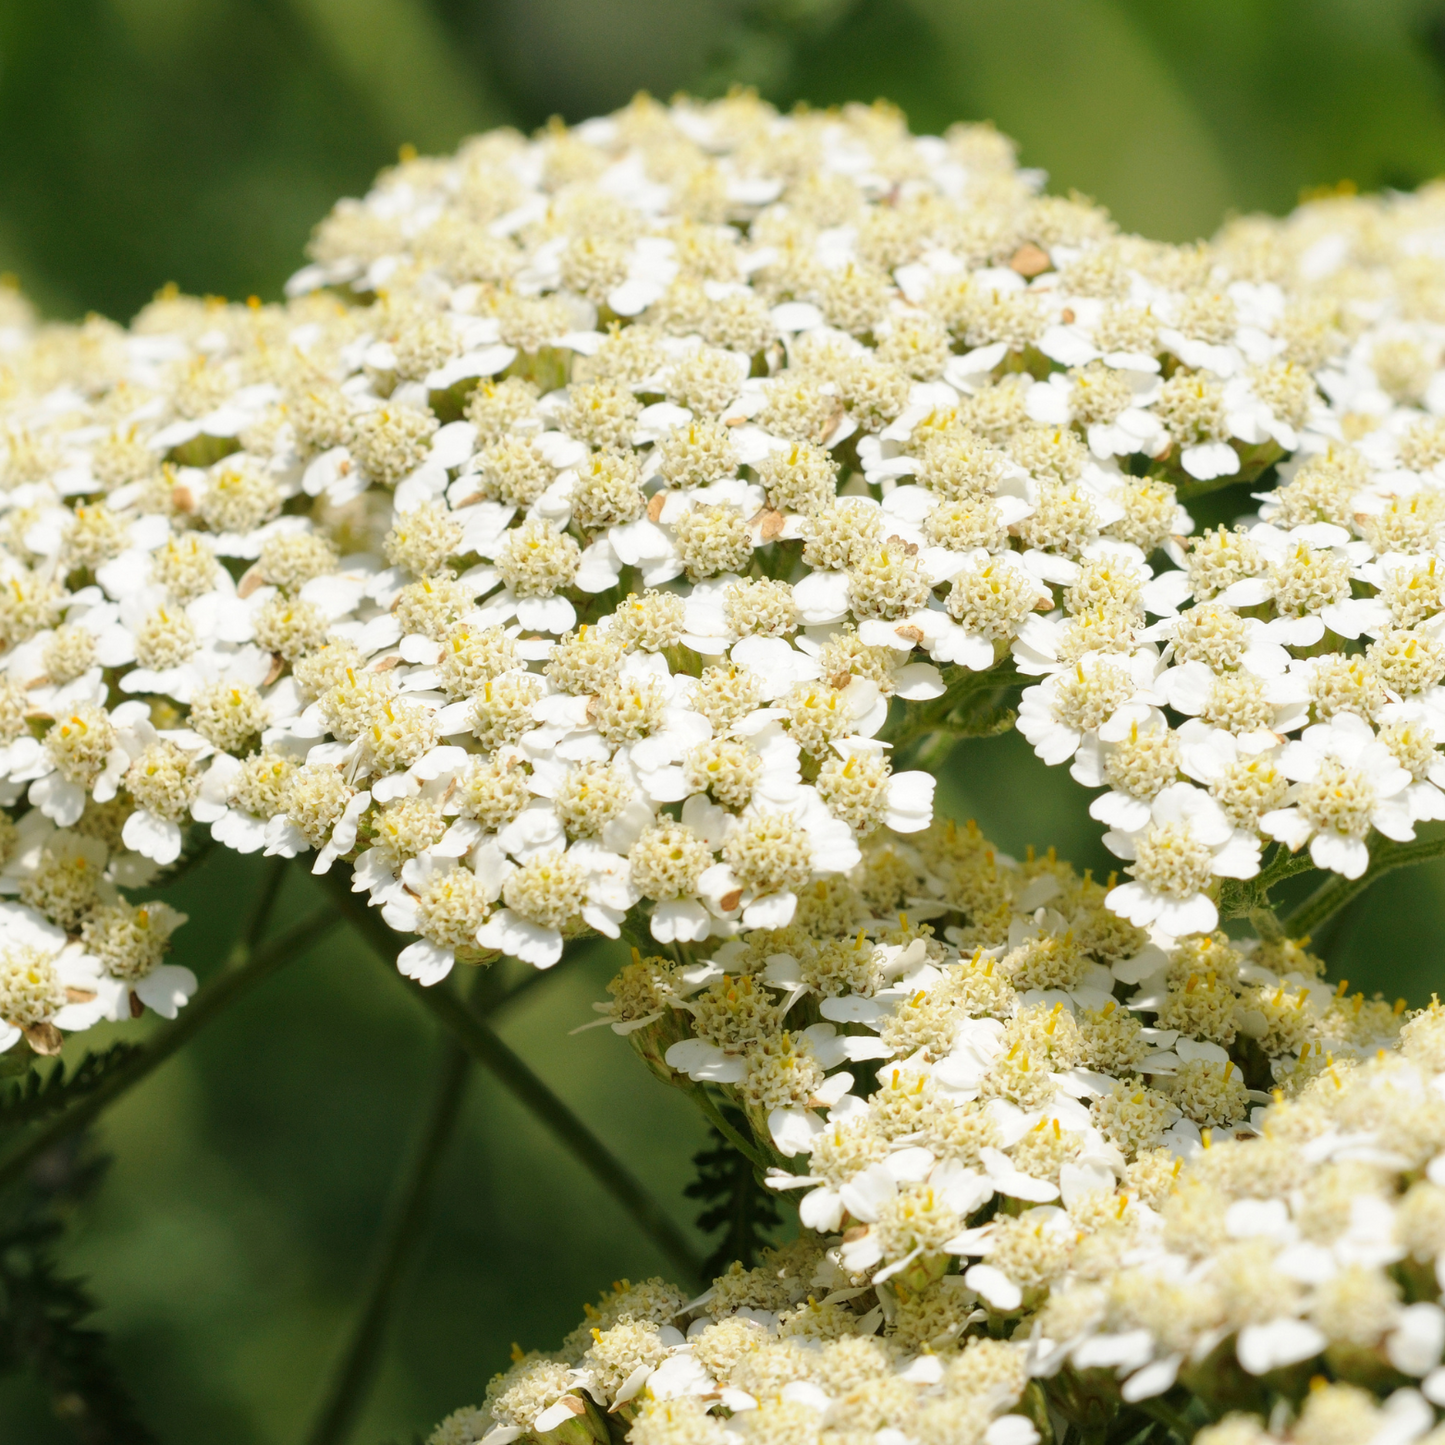 Yarrow Flowers Herb For Topical Wound Healing, Heighten Senses for Ritual and Intuition